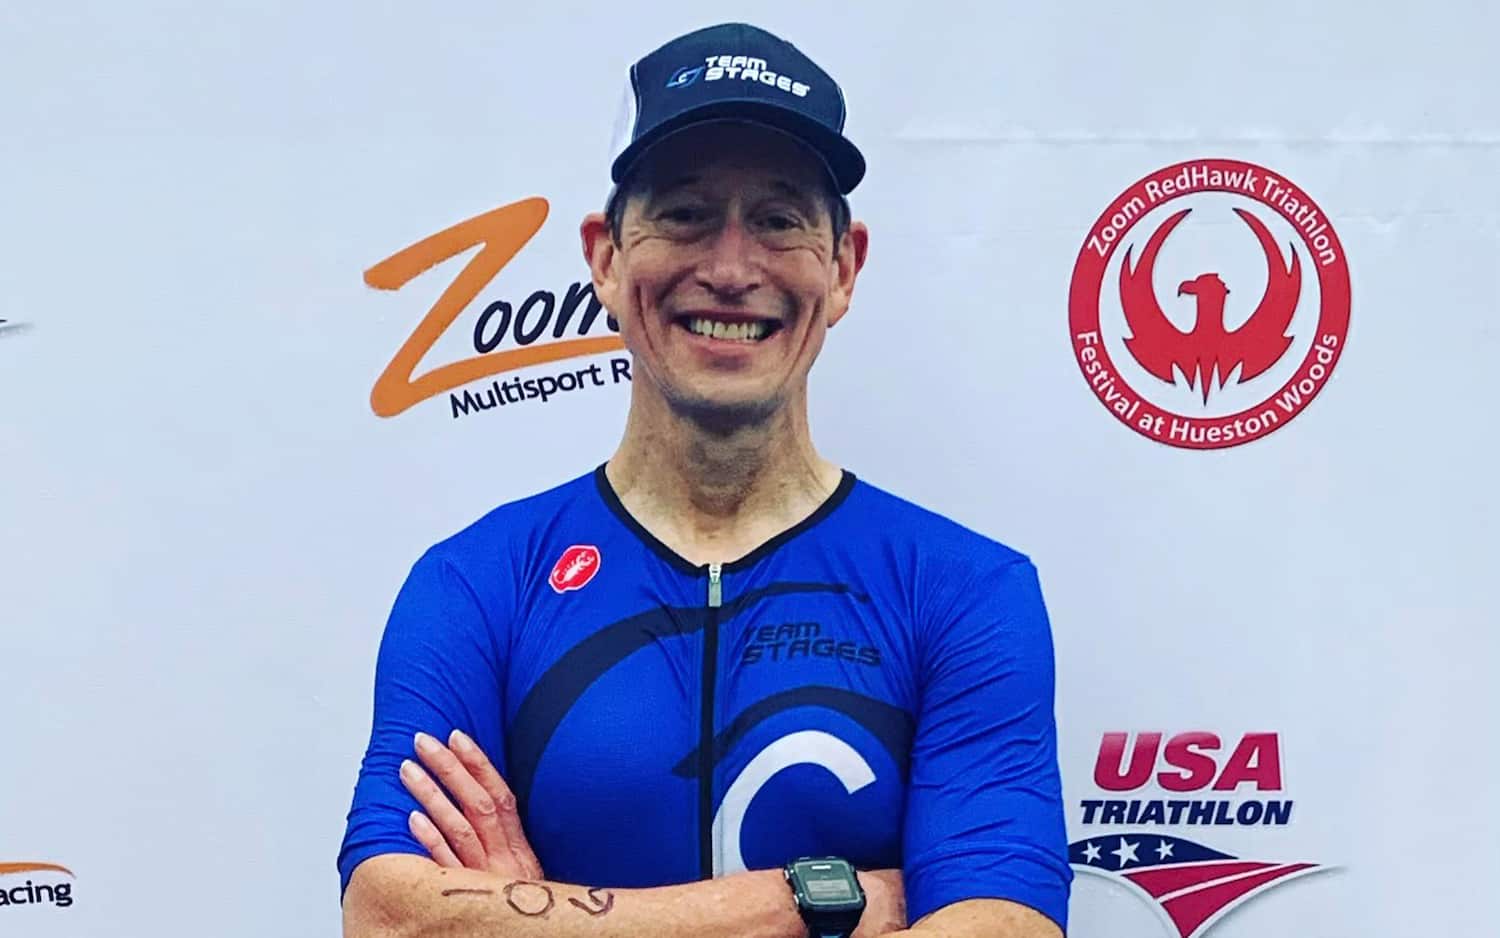 Bruce Miller smiles an dstands in front the Zoom RedHawk Triathlon Festival's photo backdrop.